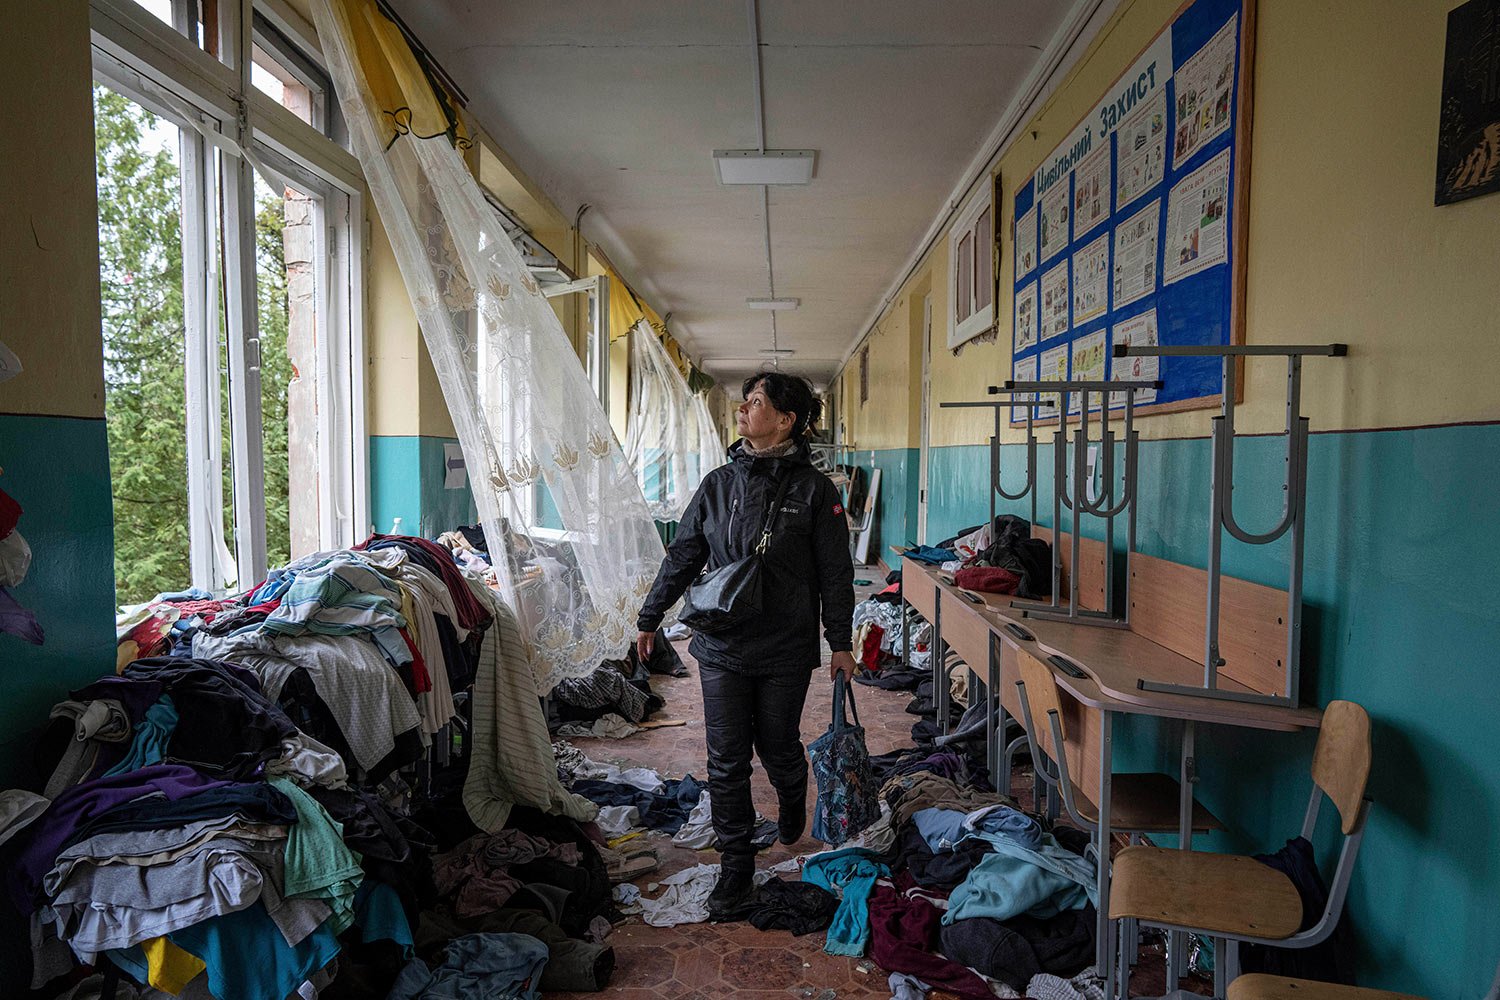  A school director Iryna Homenko walks in the hall of the school damaged by an airstrike from Russian forces in Chernihiv, Ukraine, Wednesday, April 13, 2022. (AP Photo/Evgeniy Maloletka) 